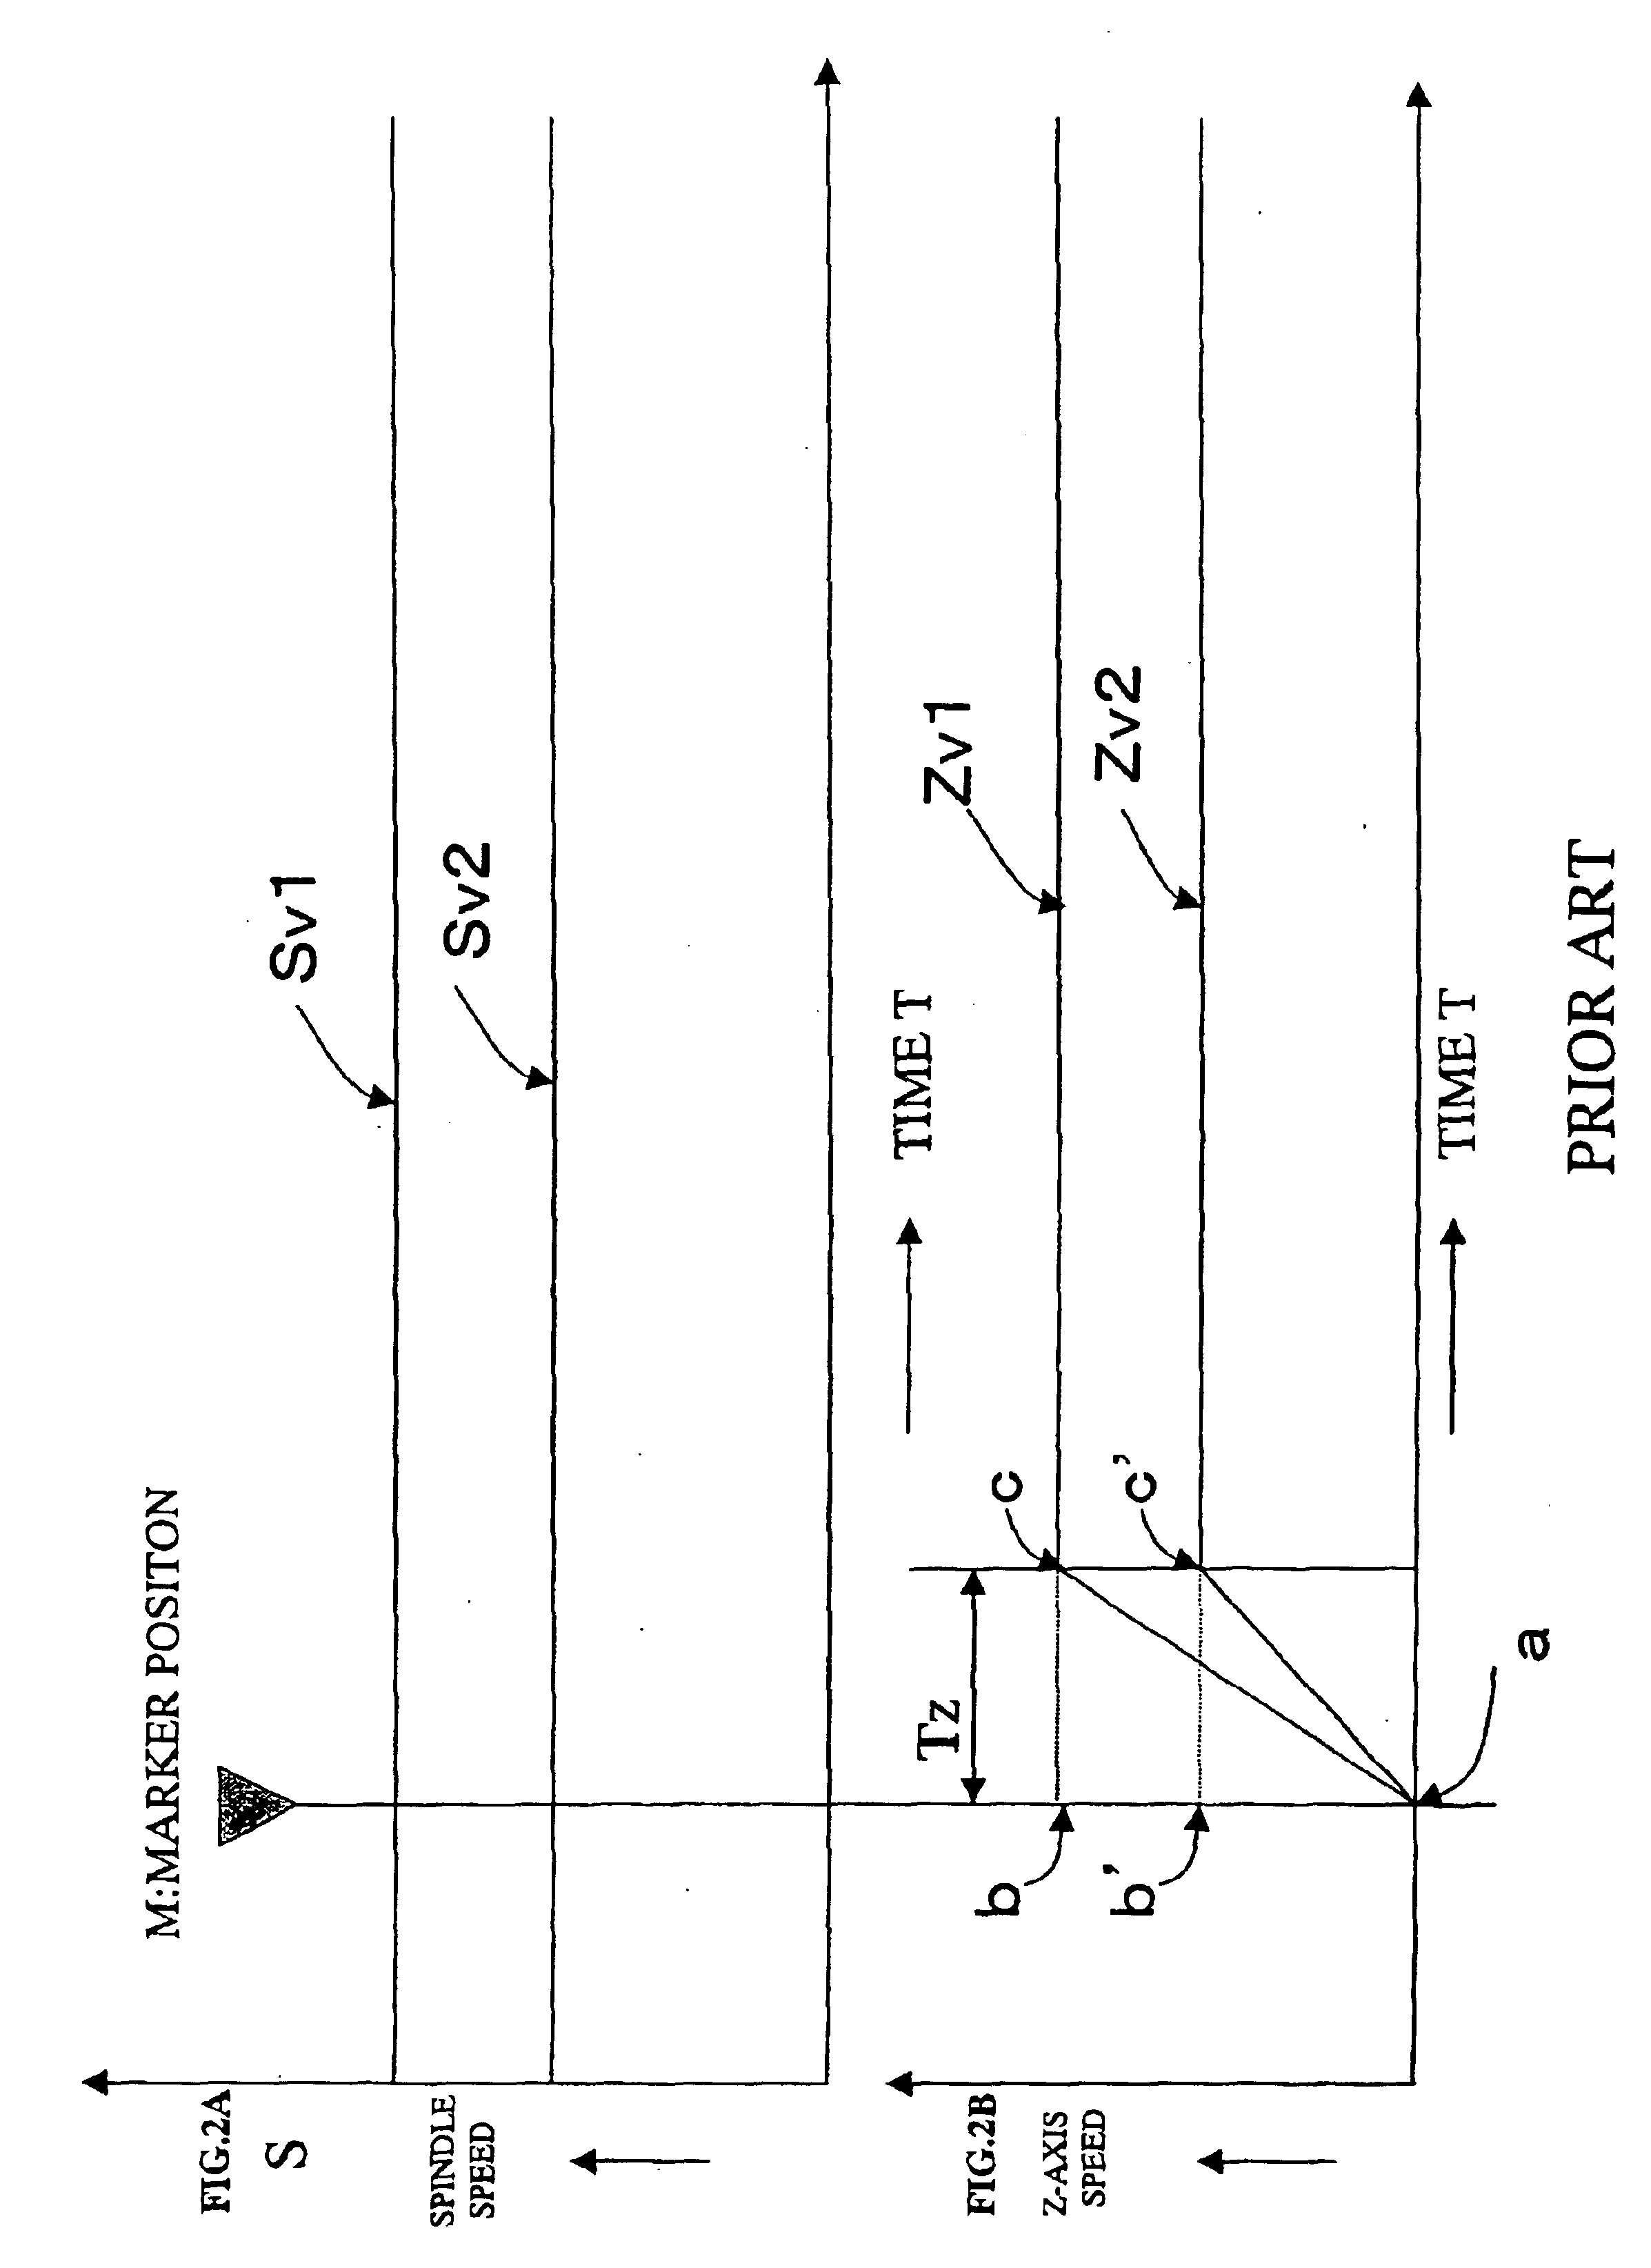 Thread machining control method and apparatus therefor